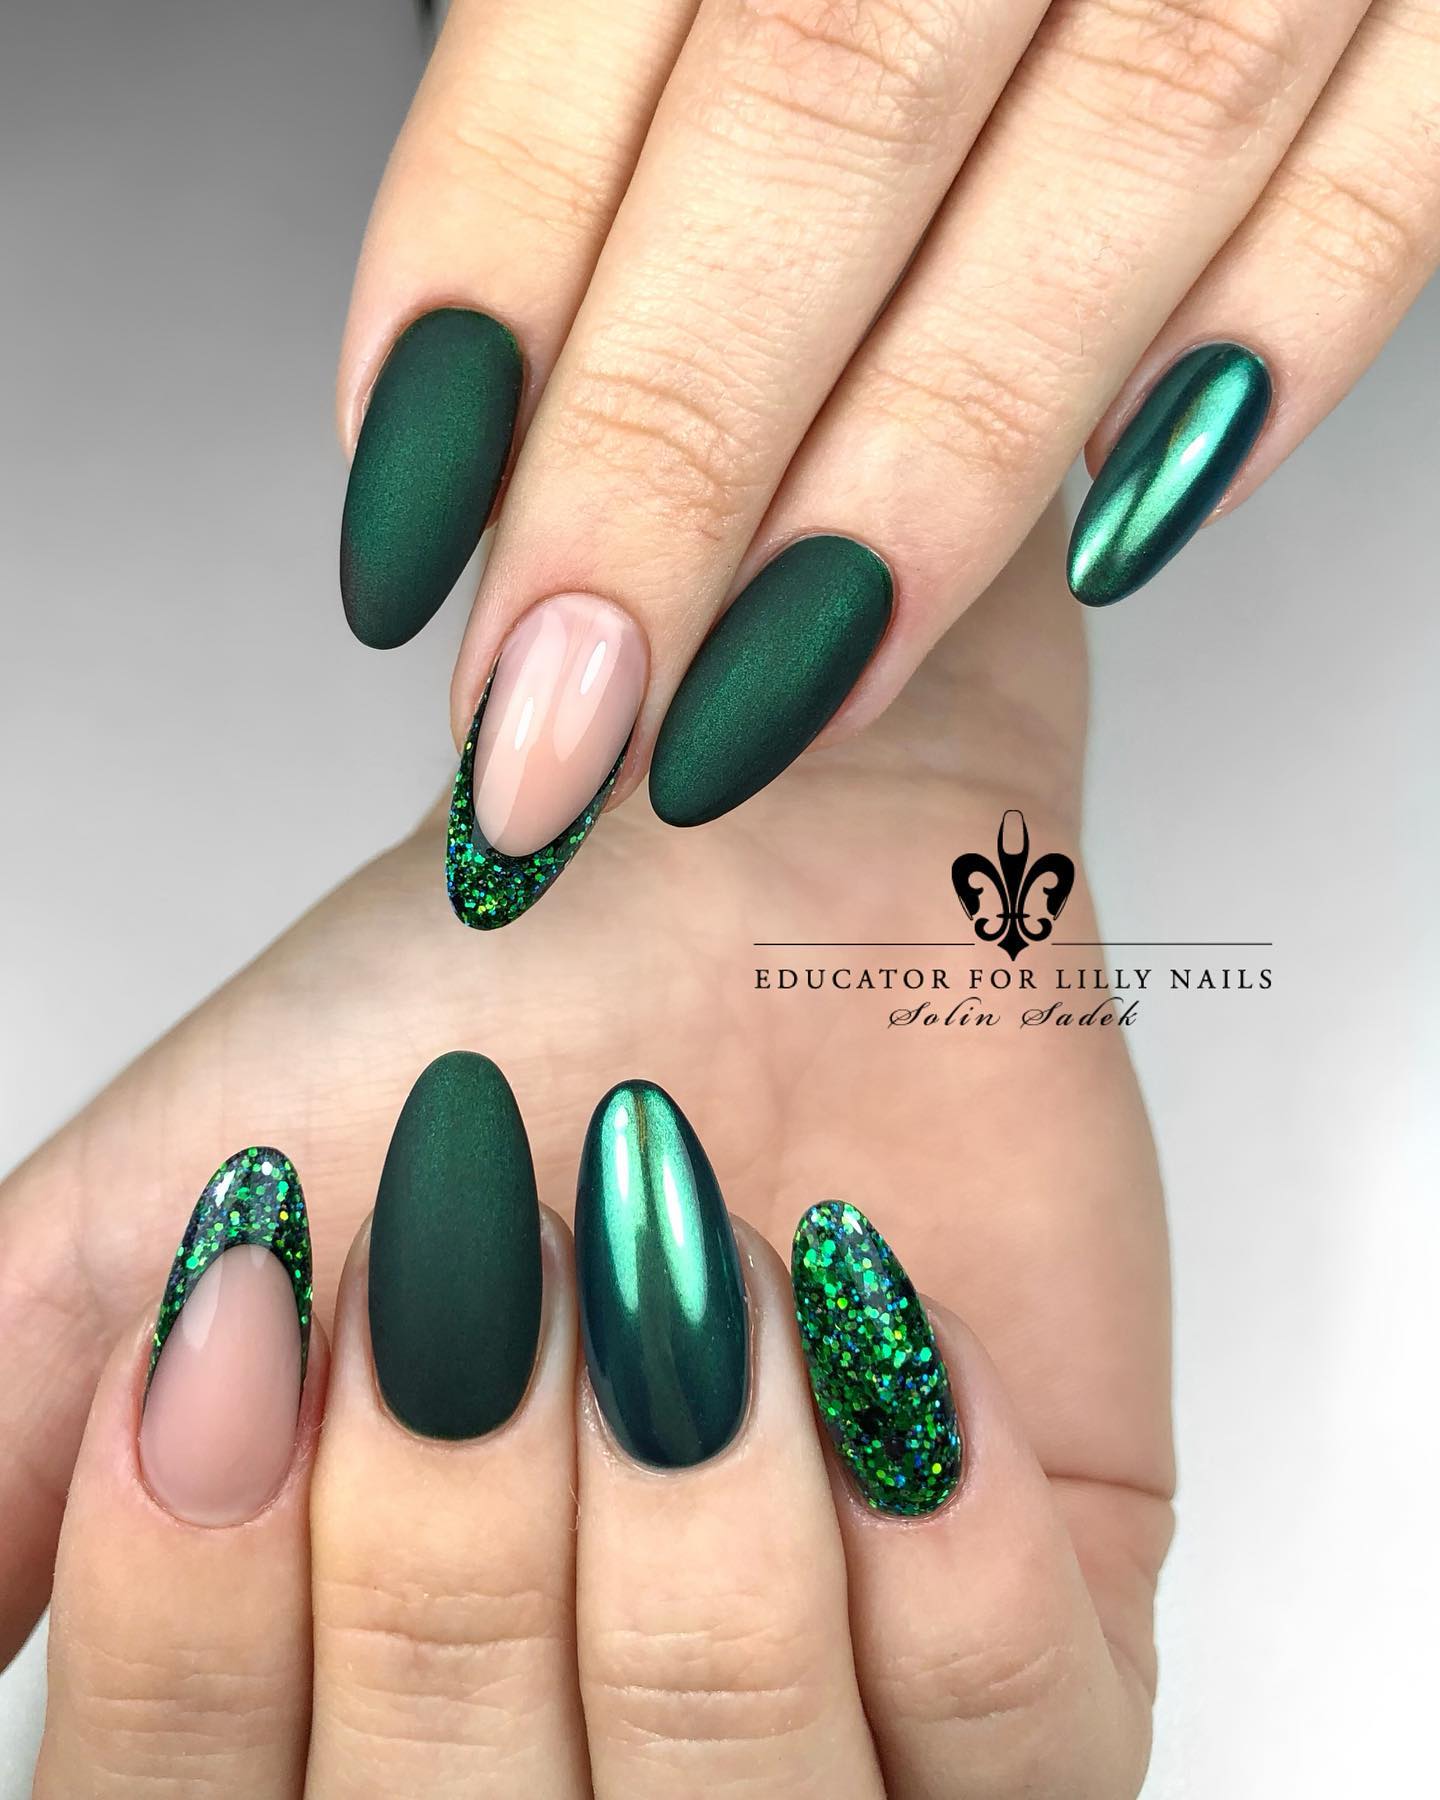 Round Green Chrome and Matte Nails with Glitter Tips